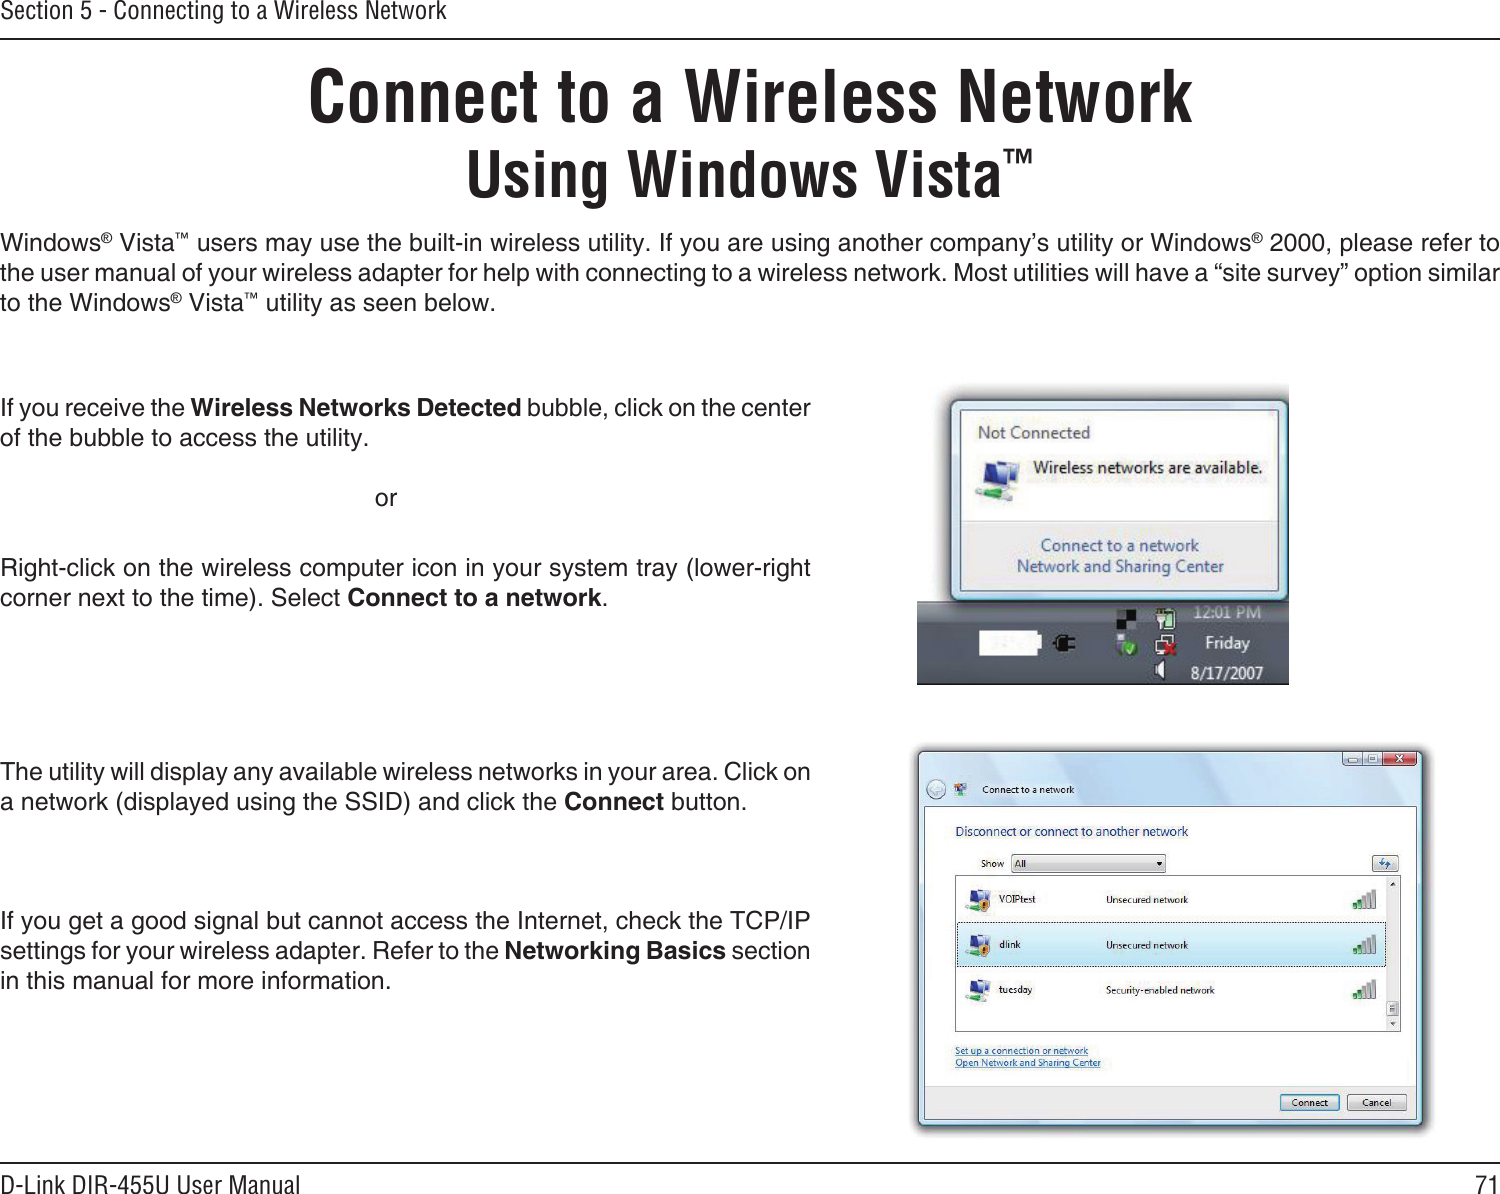 71D-Link DIR-455U User ManualSection 5 - Connecting to a Wireless NetworkConnect to a Wireless NetworkUsing Windows Vista™Windows® Vista™ users may use the built-in wireless utility. If you are using another company’s utility or Windows® 2000, please refer to the user manual of your wireless adapter for help with connecting to a wireless network. Most utilities will have a “site survey” option similar to the Windows® Vista™ utility as seen below.Right-click on the wireless computer icon in your system tray (lower-right corner next to the time). Select Connect to a network.If you receive the Wireless Networks Detected bubble, click on the center of the bubble to access the utility.     orThe utility will display any available wireless networks in your area. Click on a network (displayed using the SSID) and click the Connect button.If you get a good signal but cannot access the Internet, check the TCP/IP settings for your wireless adapter. Refer to the Networking Basics section in this manual for more information.